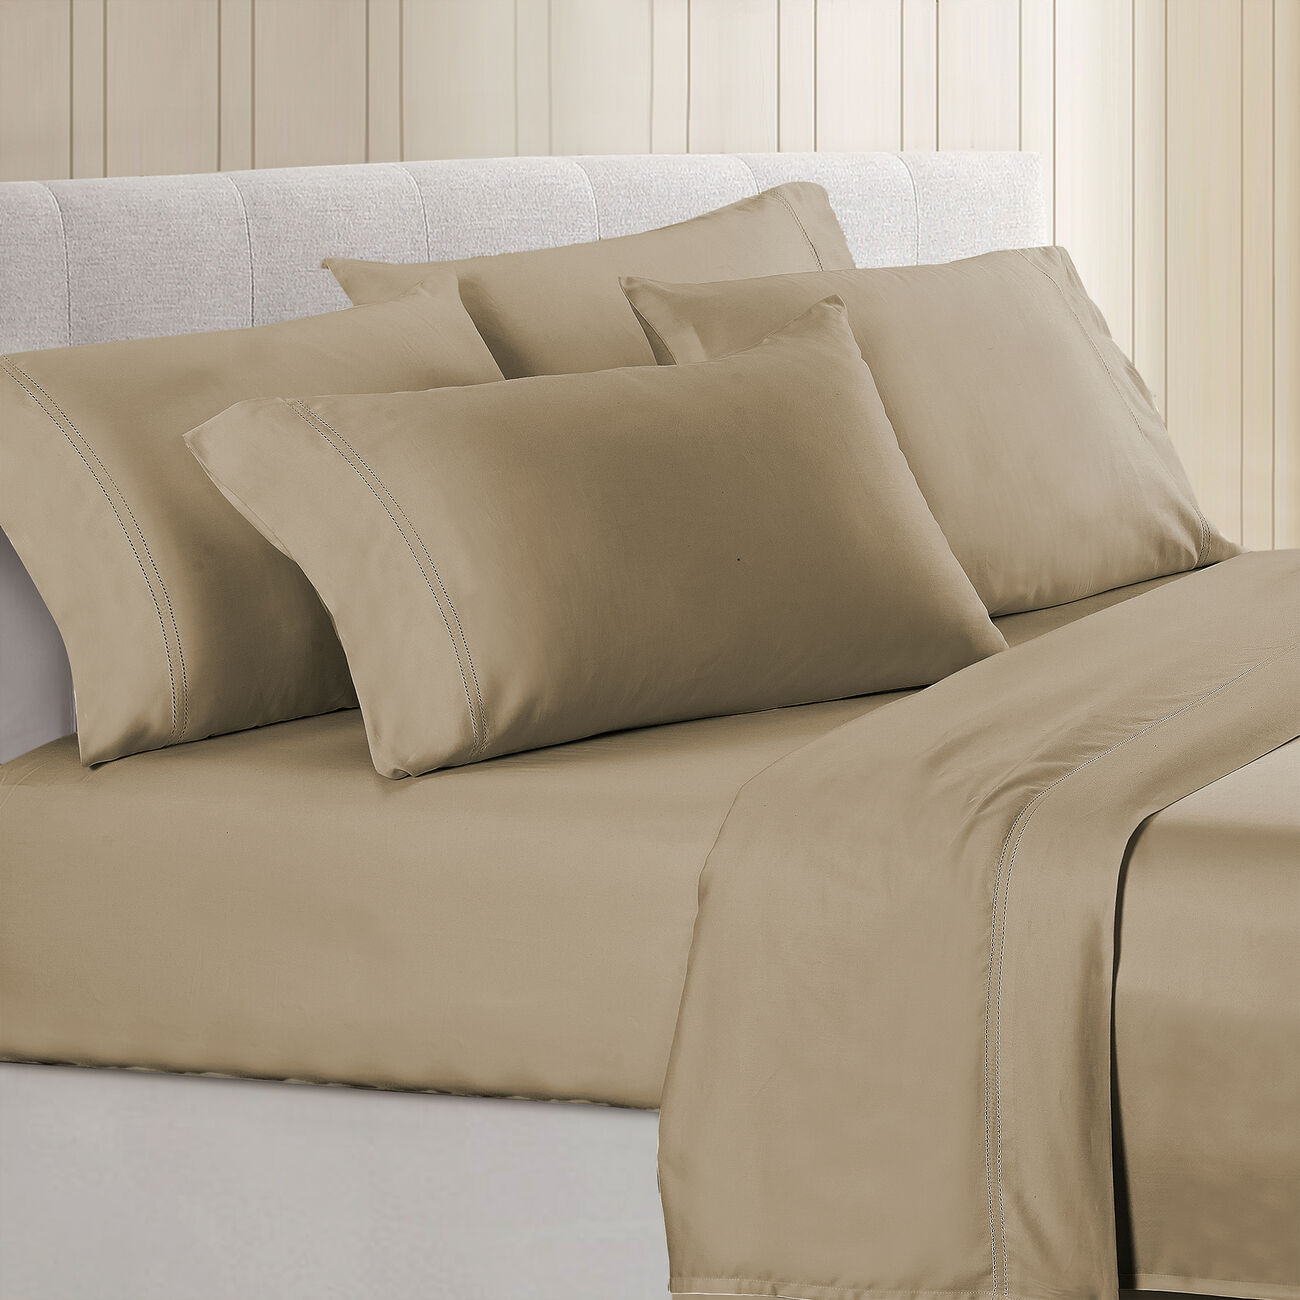 Tours 6 Piece California King Size Sheet Set with Double Hem The Urban Port, Brown